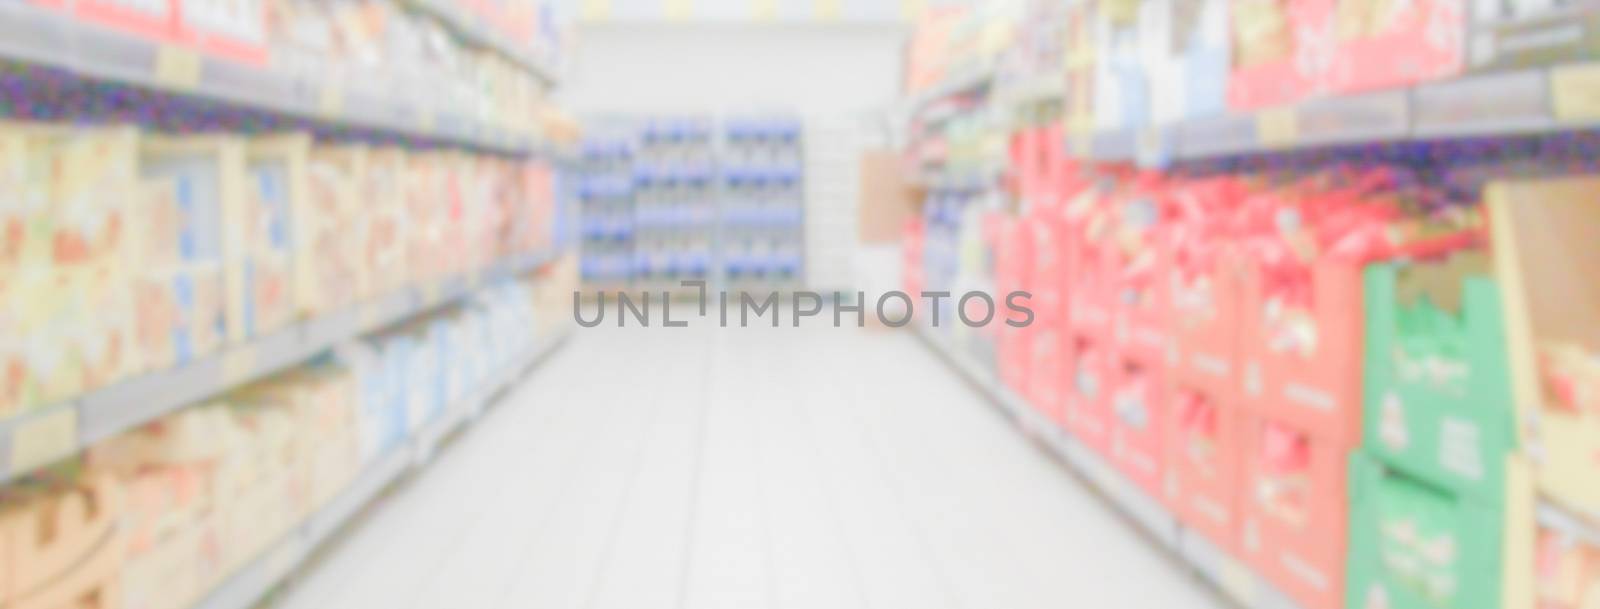 Defocused background with interiors of a supermarket or grocery  by marcorubino